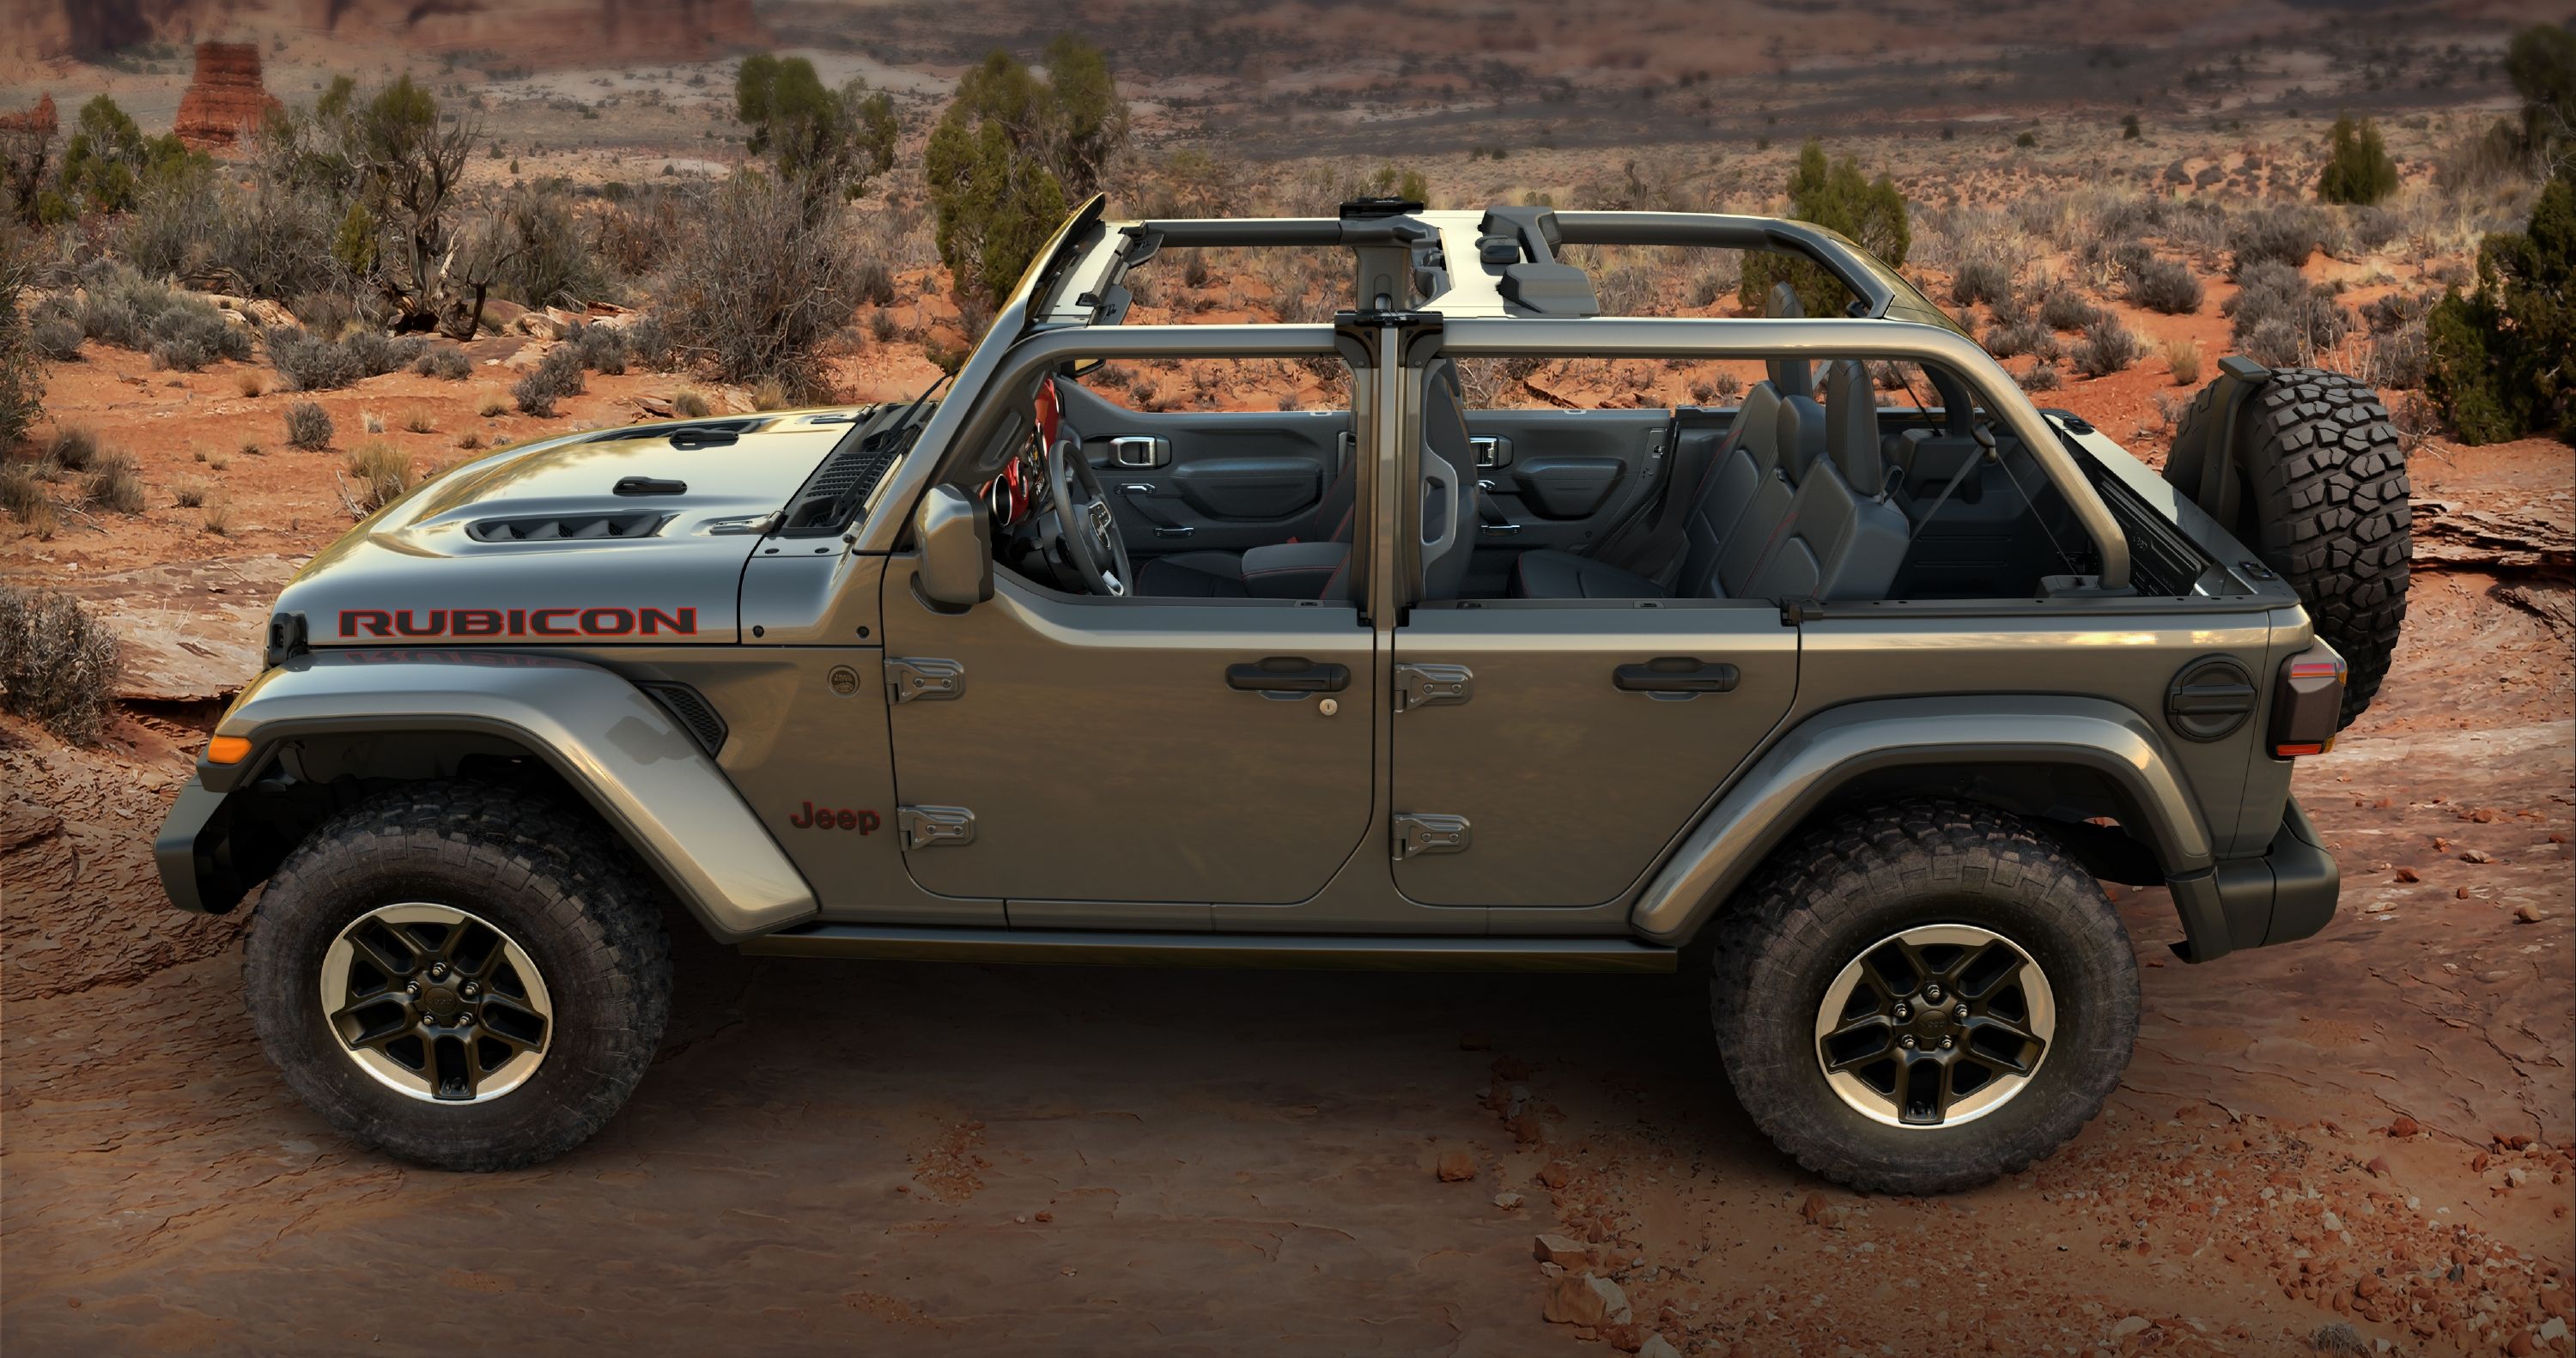 Jeep Wrangler Half-Door Option Available to Order, Starts at $2350